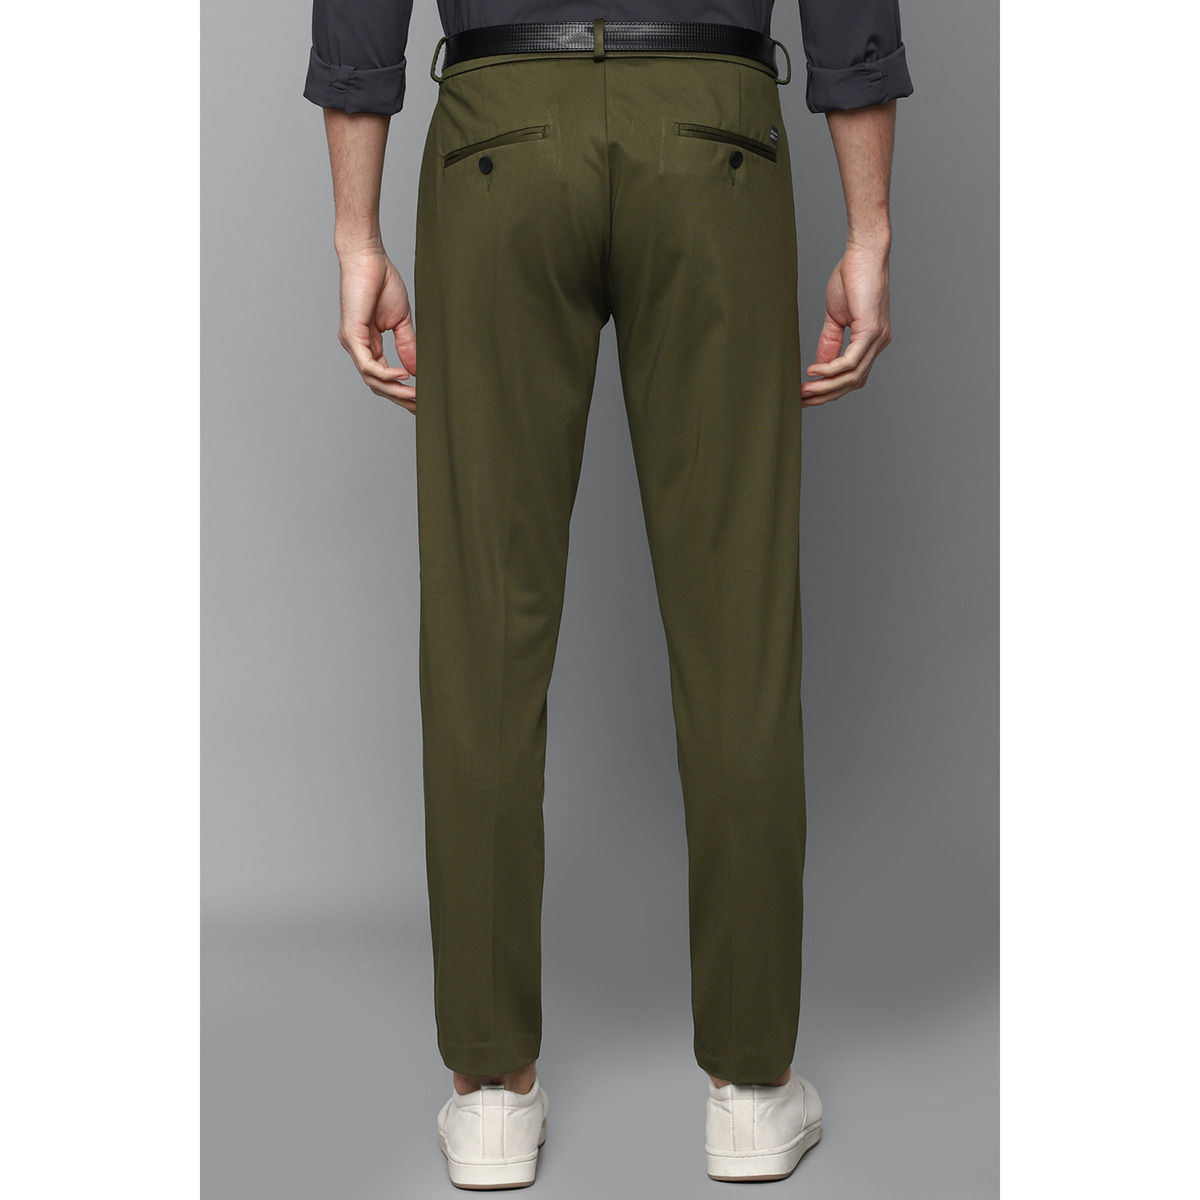 Buy Men Olive Slim Fit Solid Casual Trousers Online - 588375 | Allen Solly